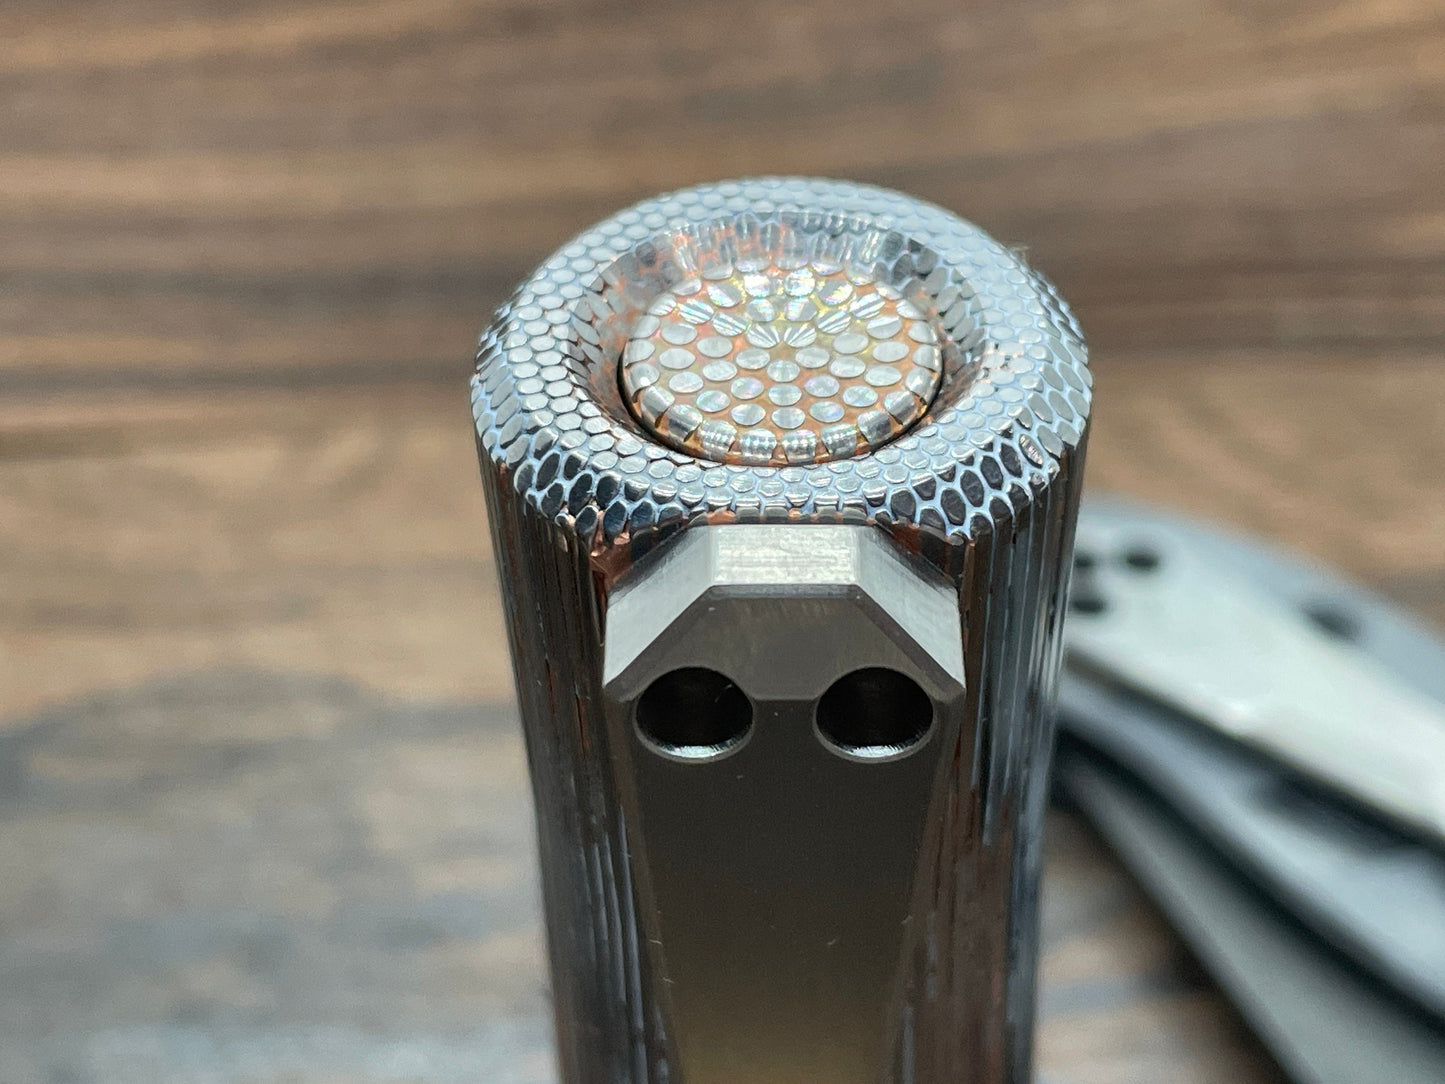 Etched SUPERCONDUCTOR EDC FLASHLIGHT